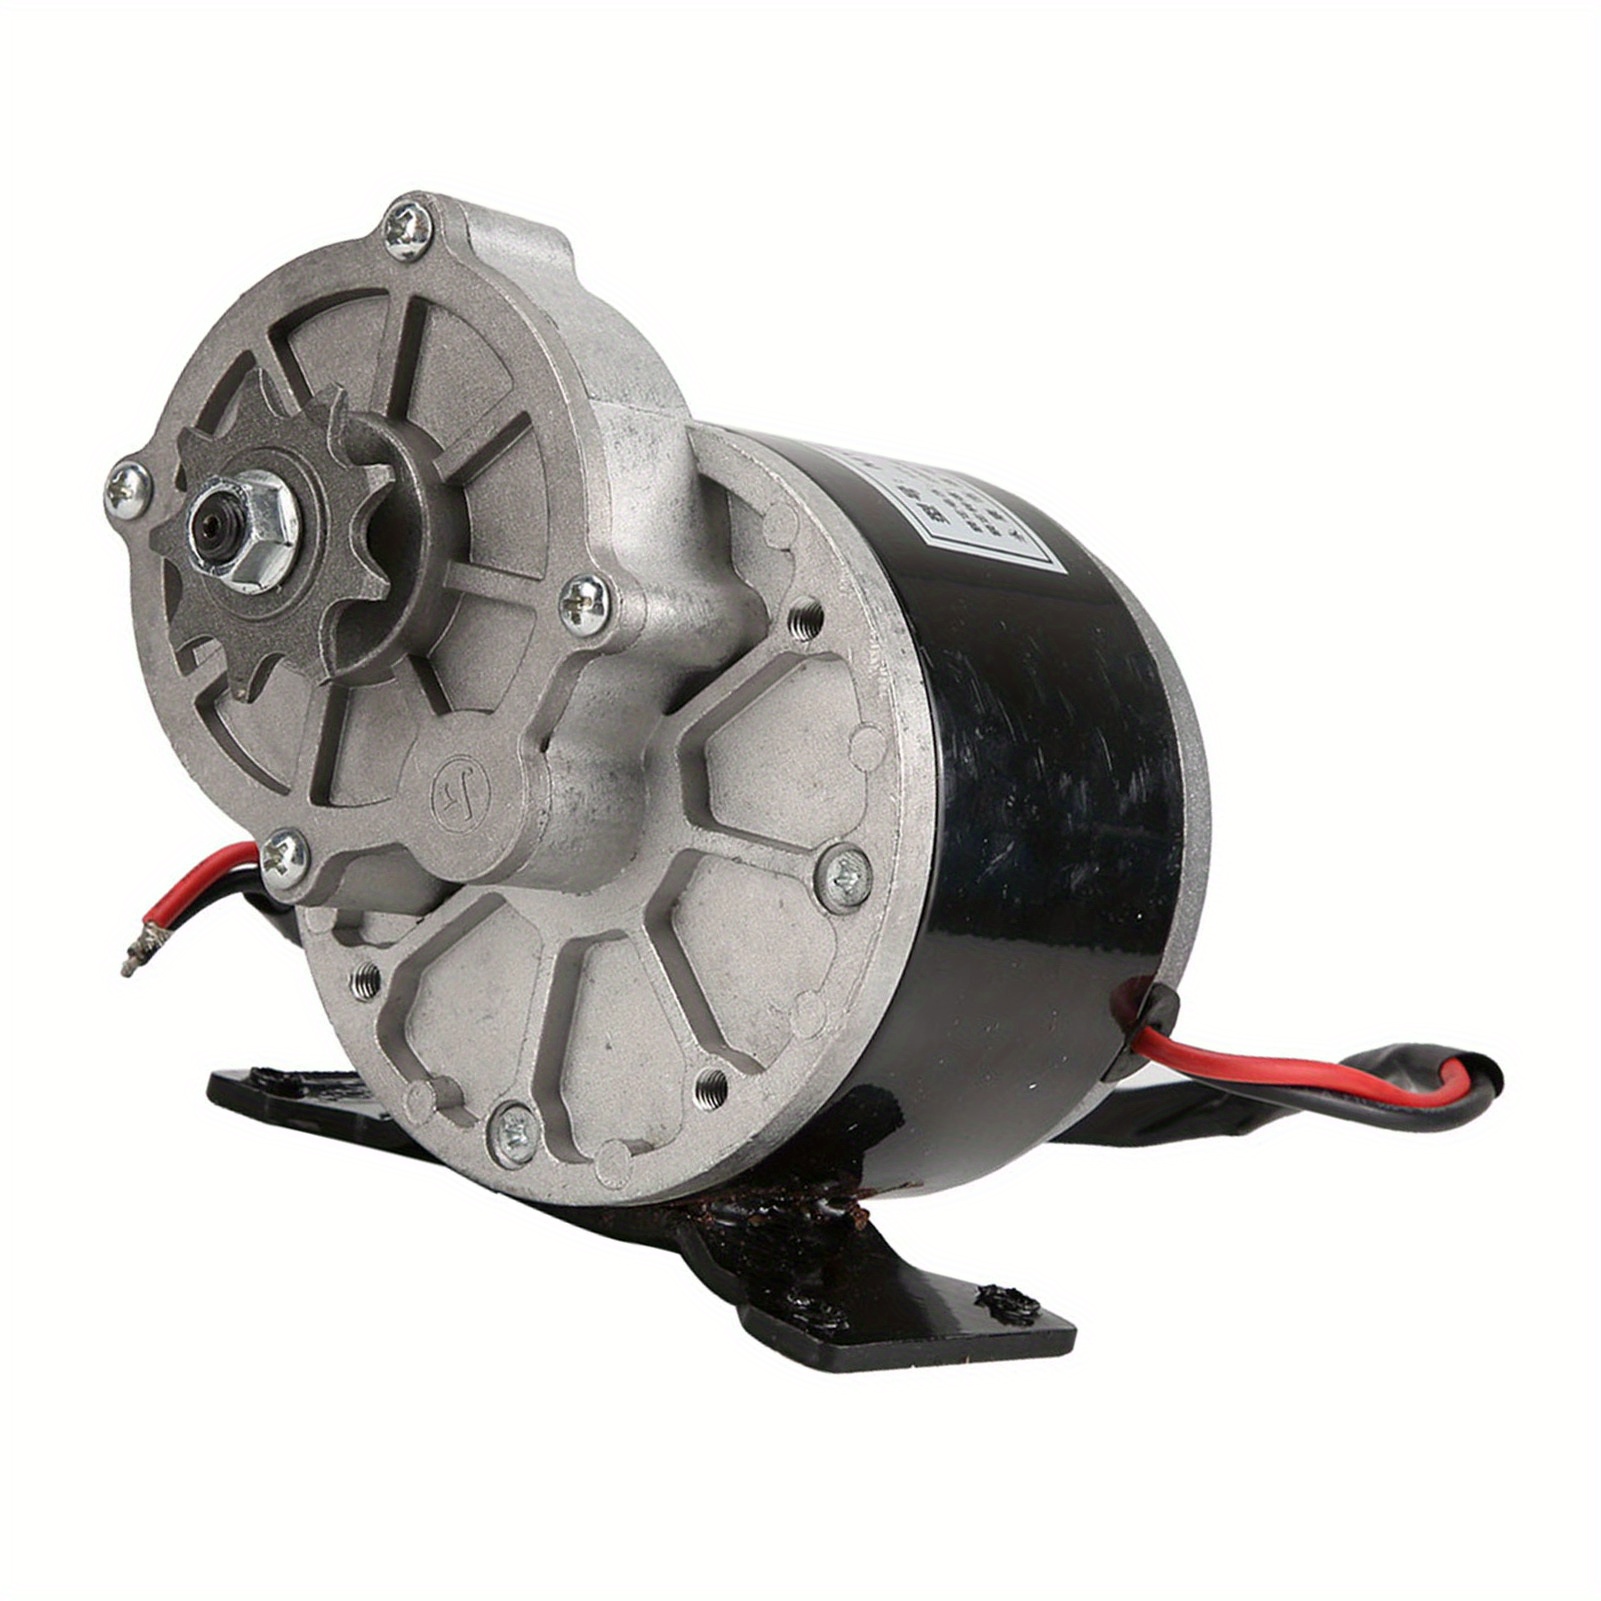 

12v 250w Gear Reduction Motor With 9 Tooth Sprocket Brushed Dc Motors Reductor For E‑bike Scooter